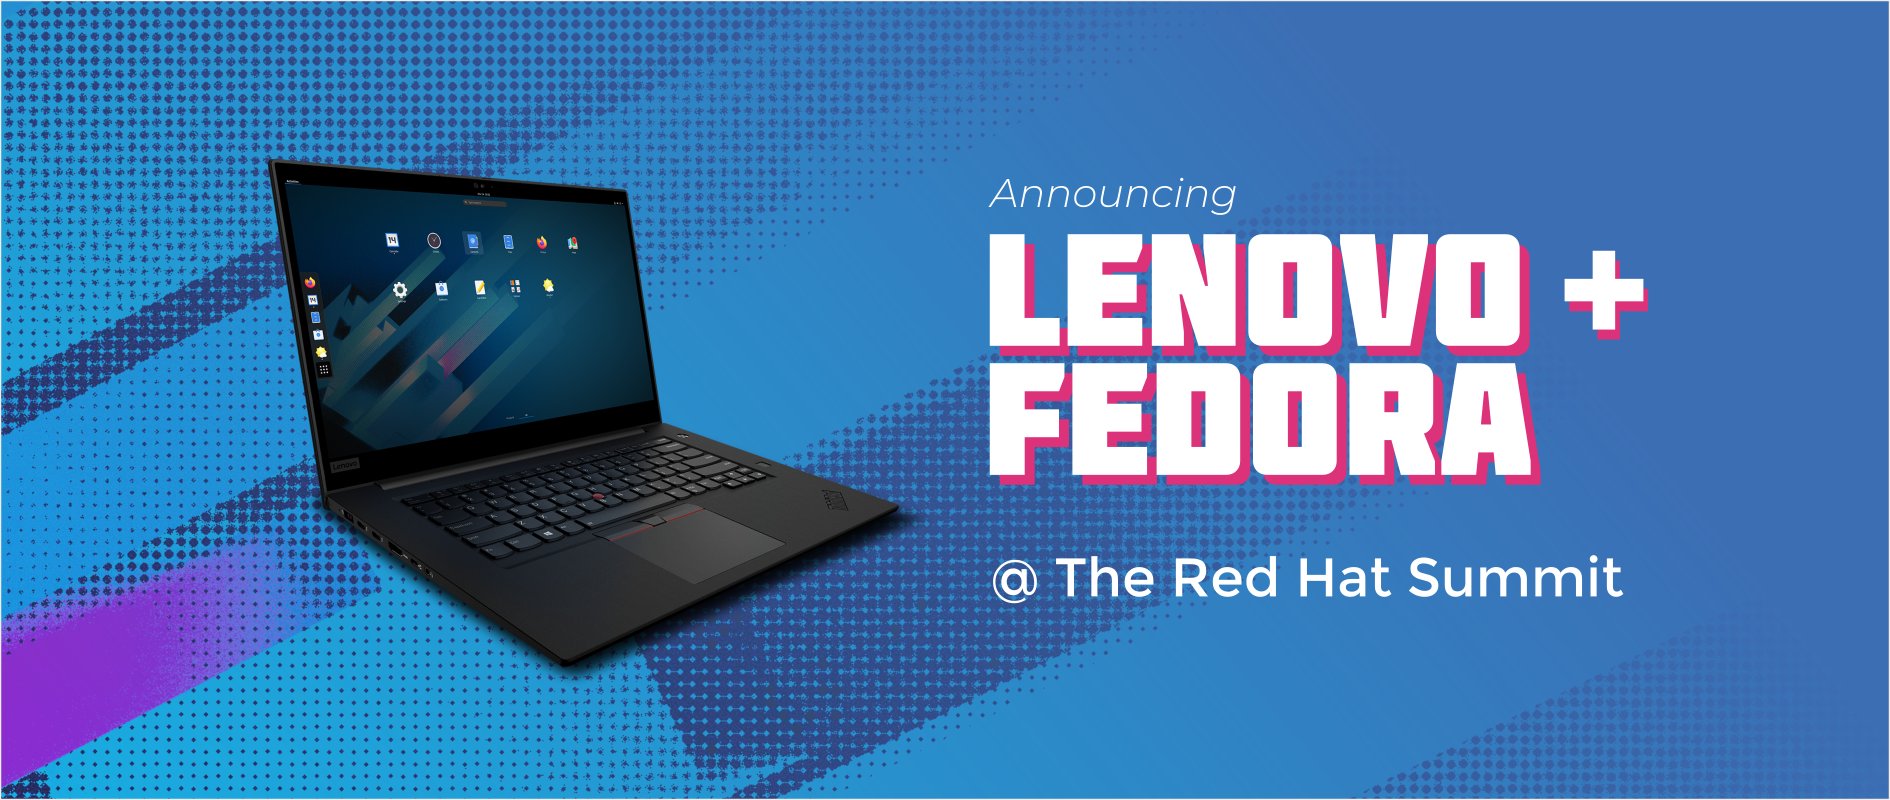 Fedora Linux Will Soon Be Available on Select Lenovo Laptops